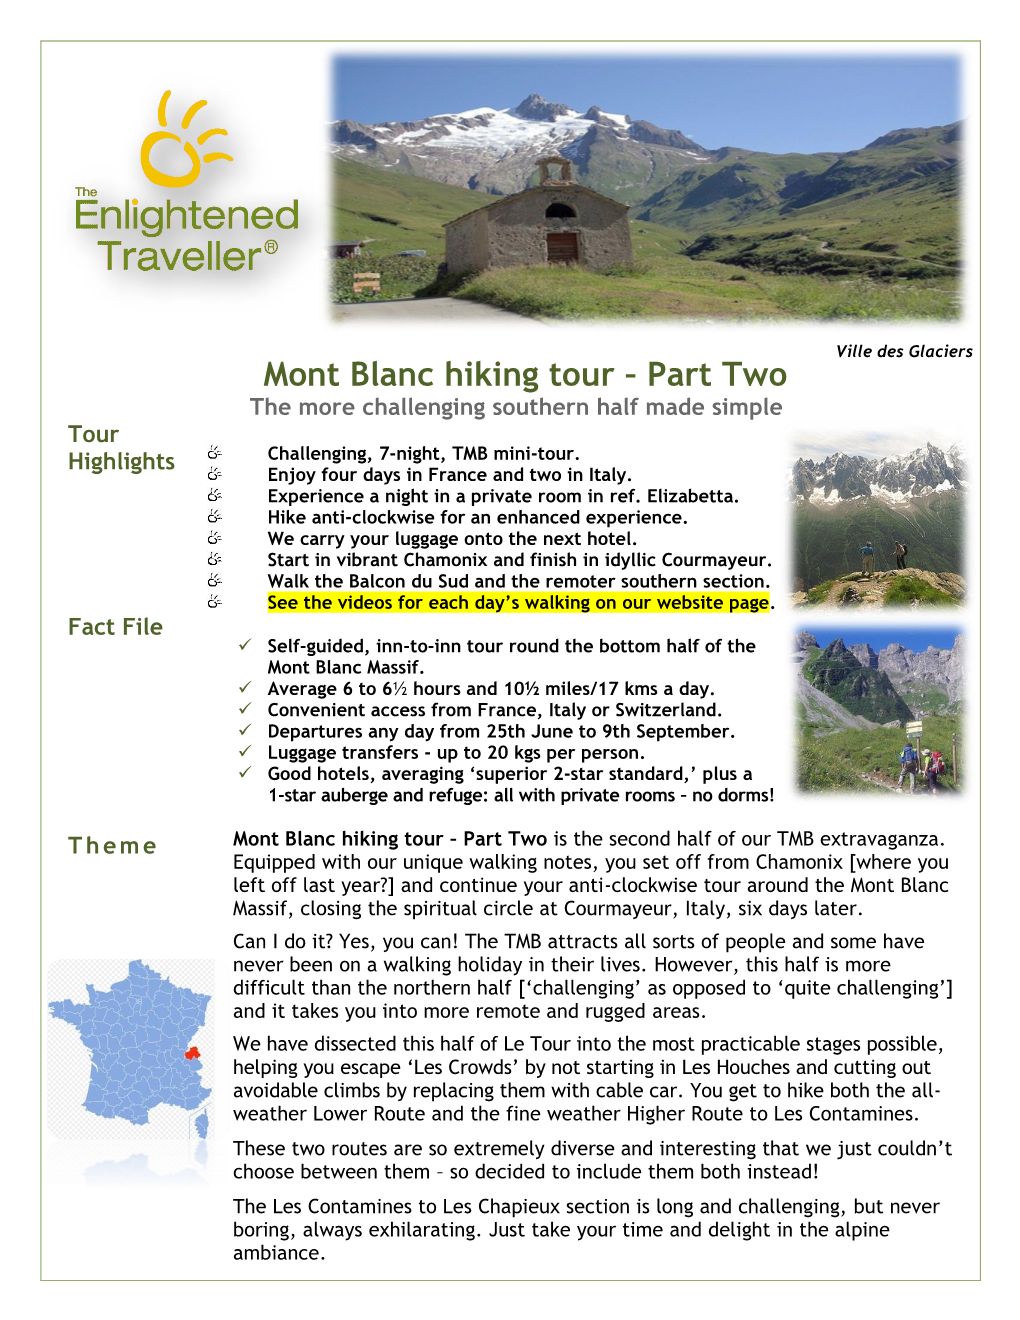 Mont Blanc Hiking Tour – Part Two the More Challenging Southern Half Made Simple Tour Highlights Challenging, 7-Night, TMB Mini-Tour